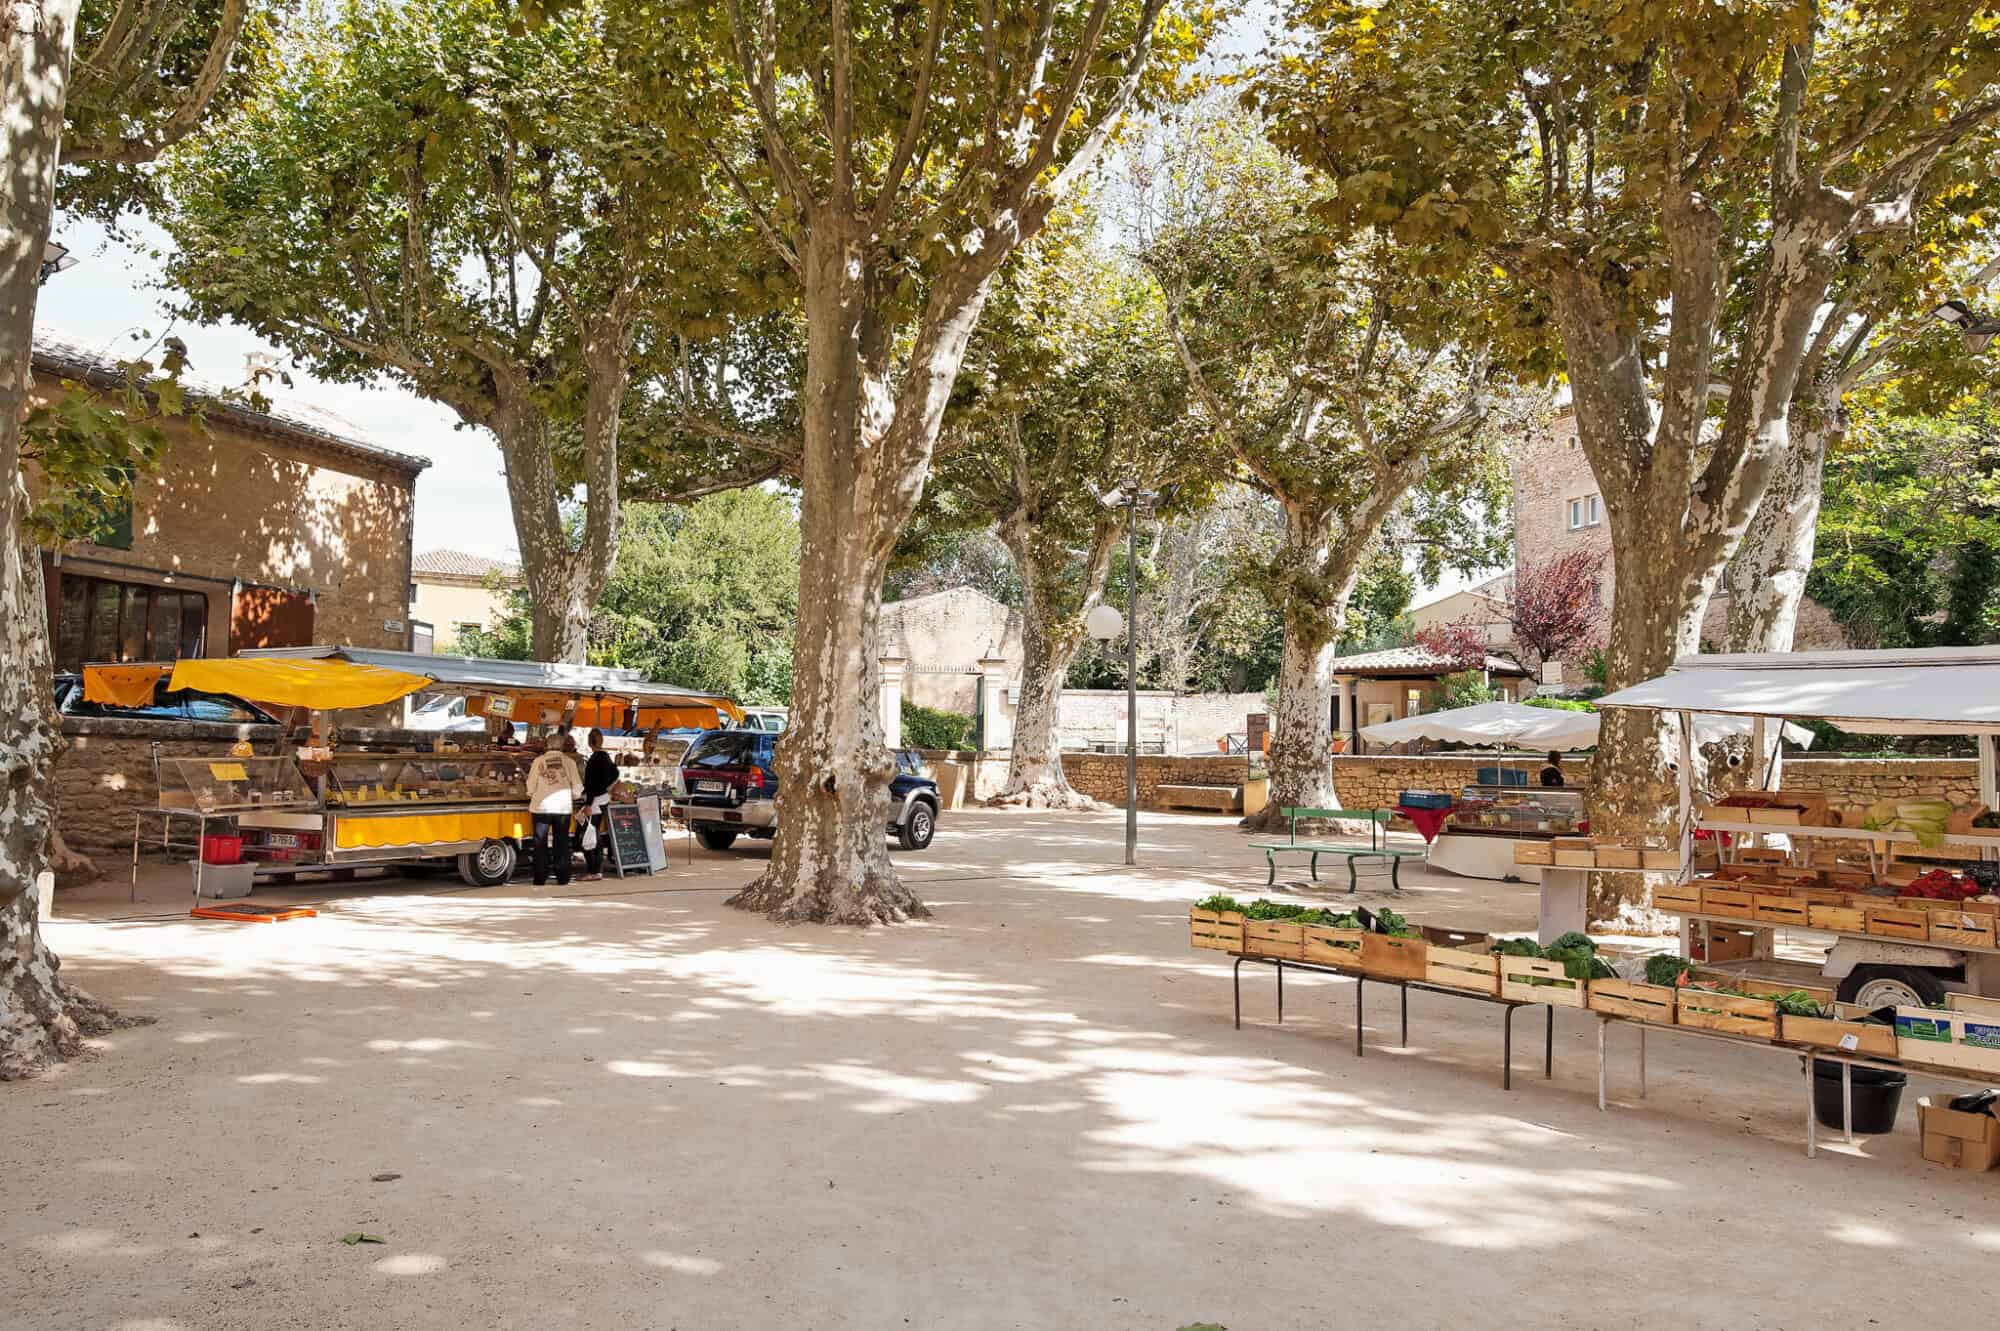 The Best Markets in Provence